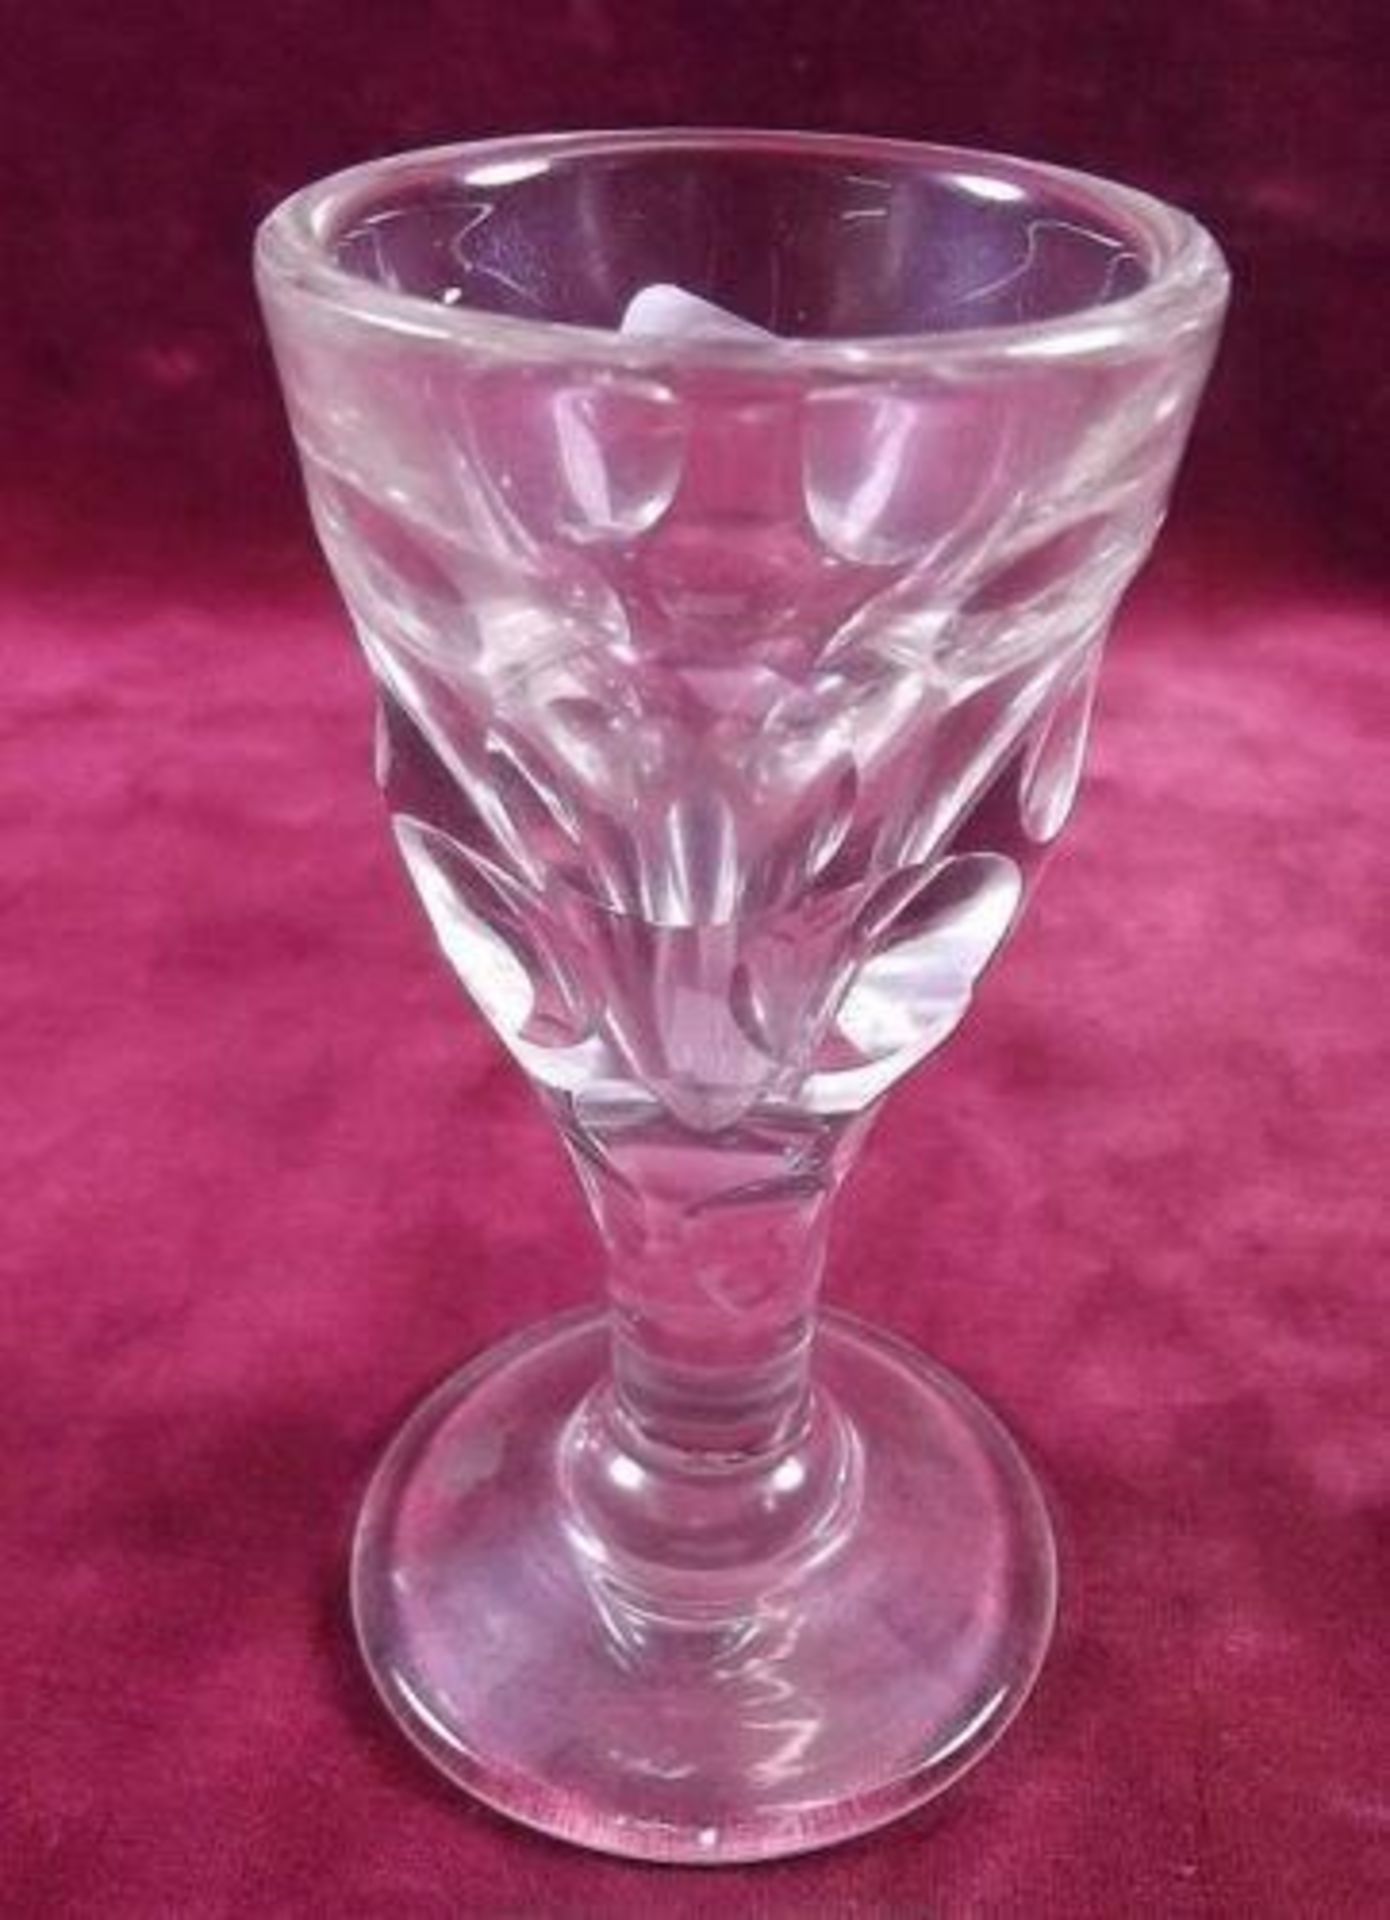 18th Century Wine Glass - 1760 George 111
Circular cut facets to bowl